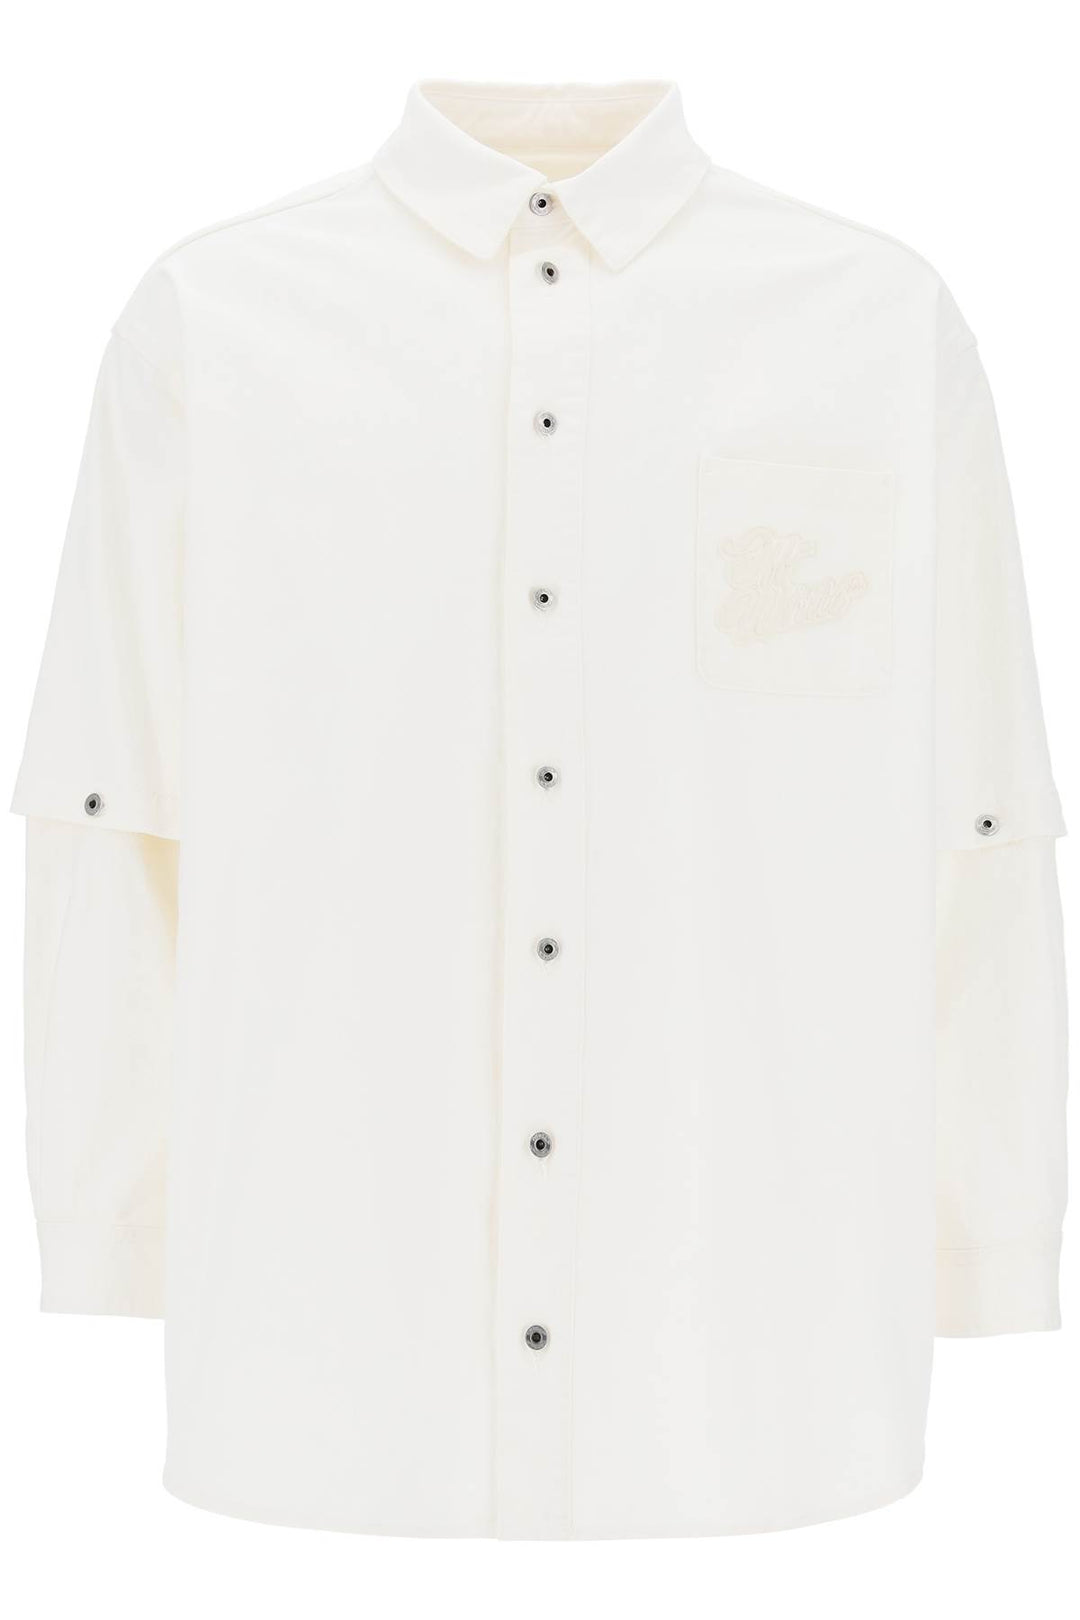 Off White Convertible Overshirt With 90's   White